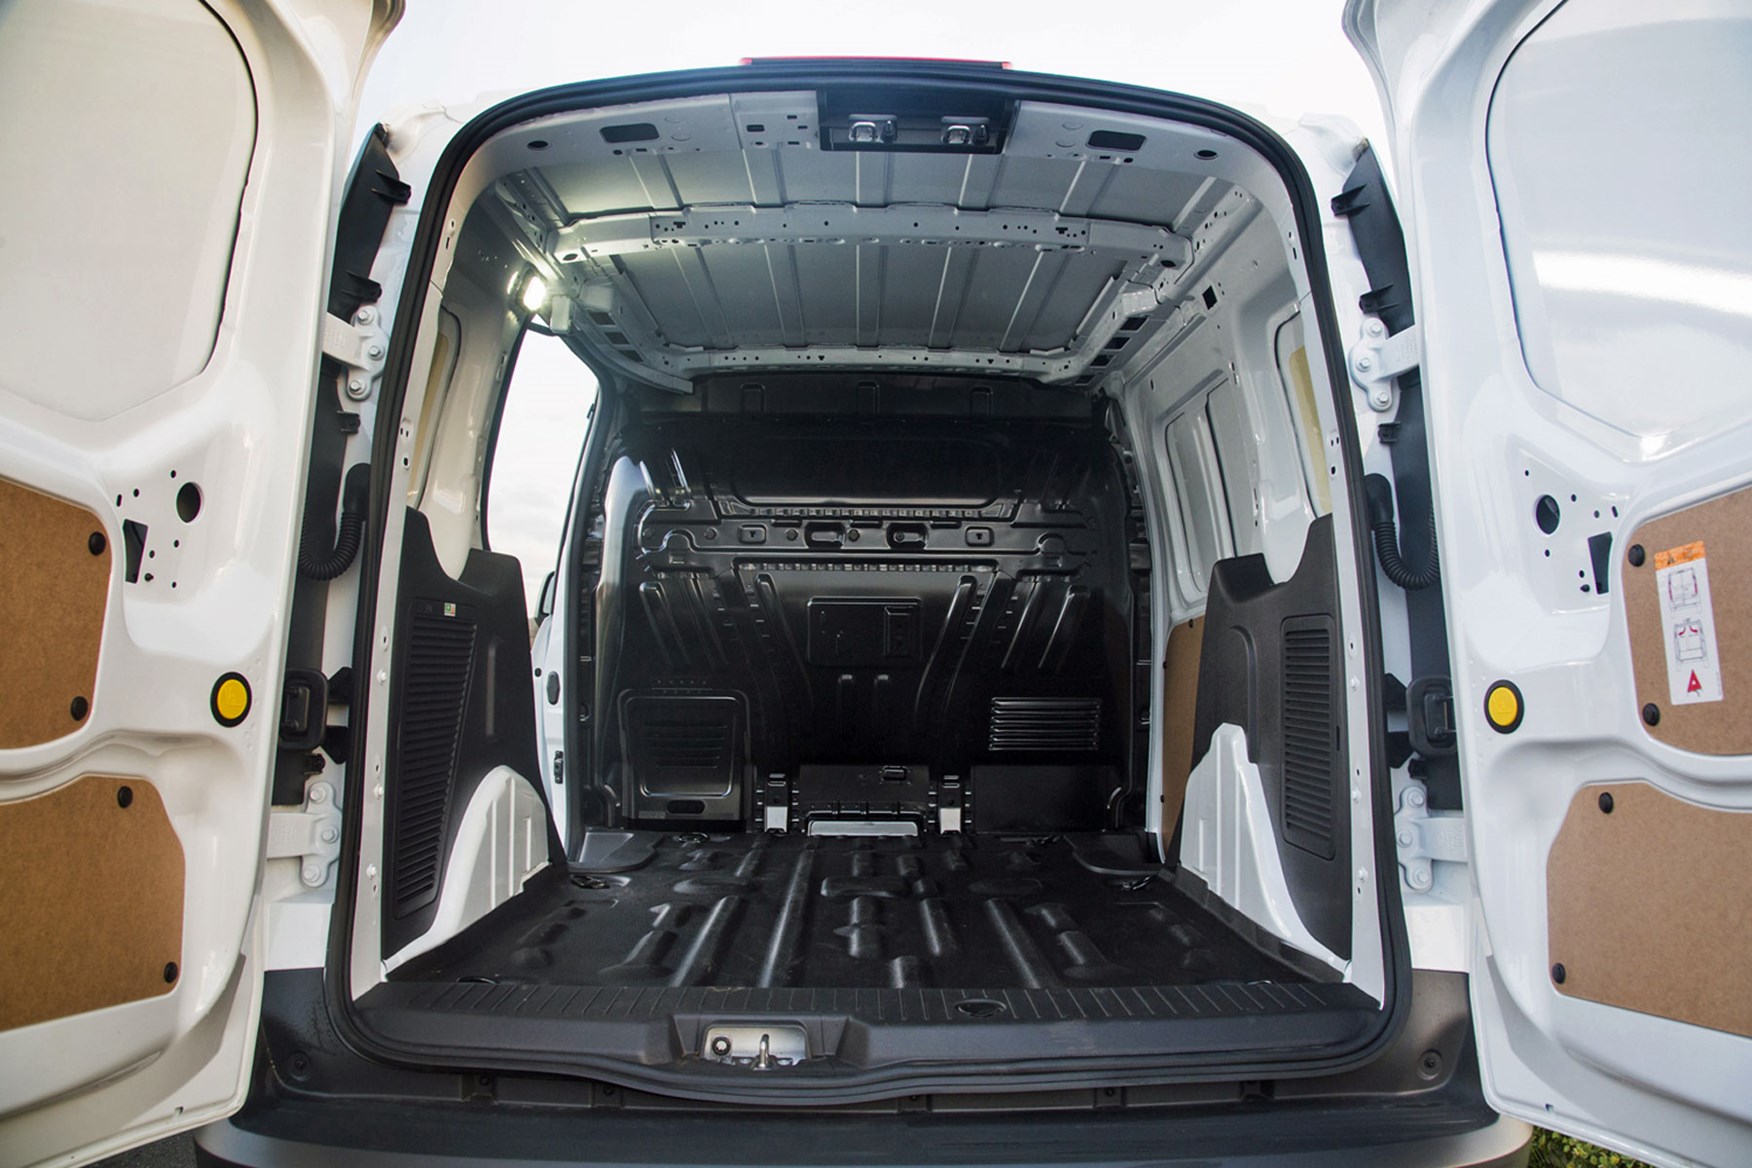 Ford Transit Connect load area dimensions